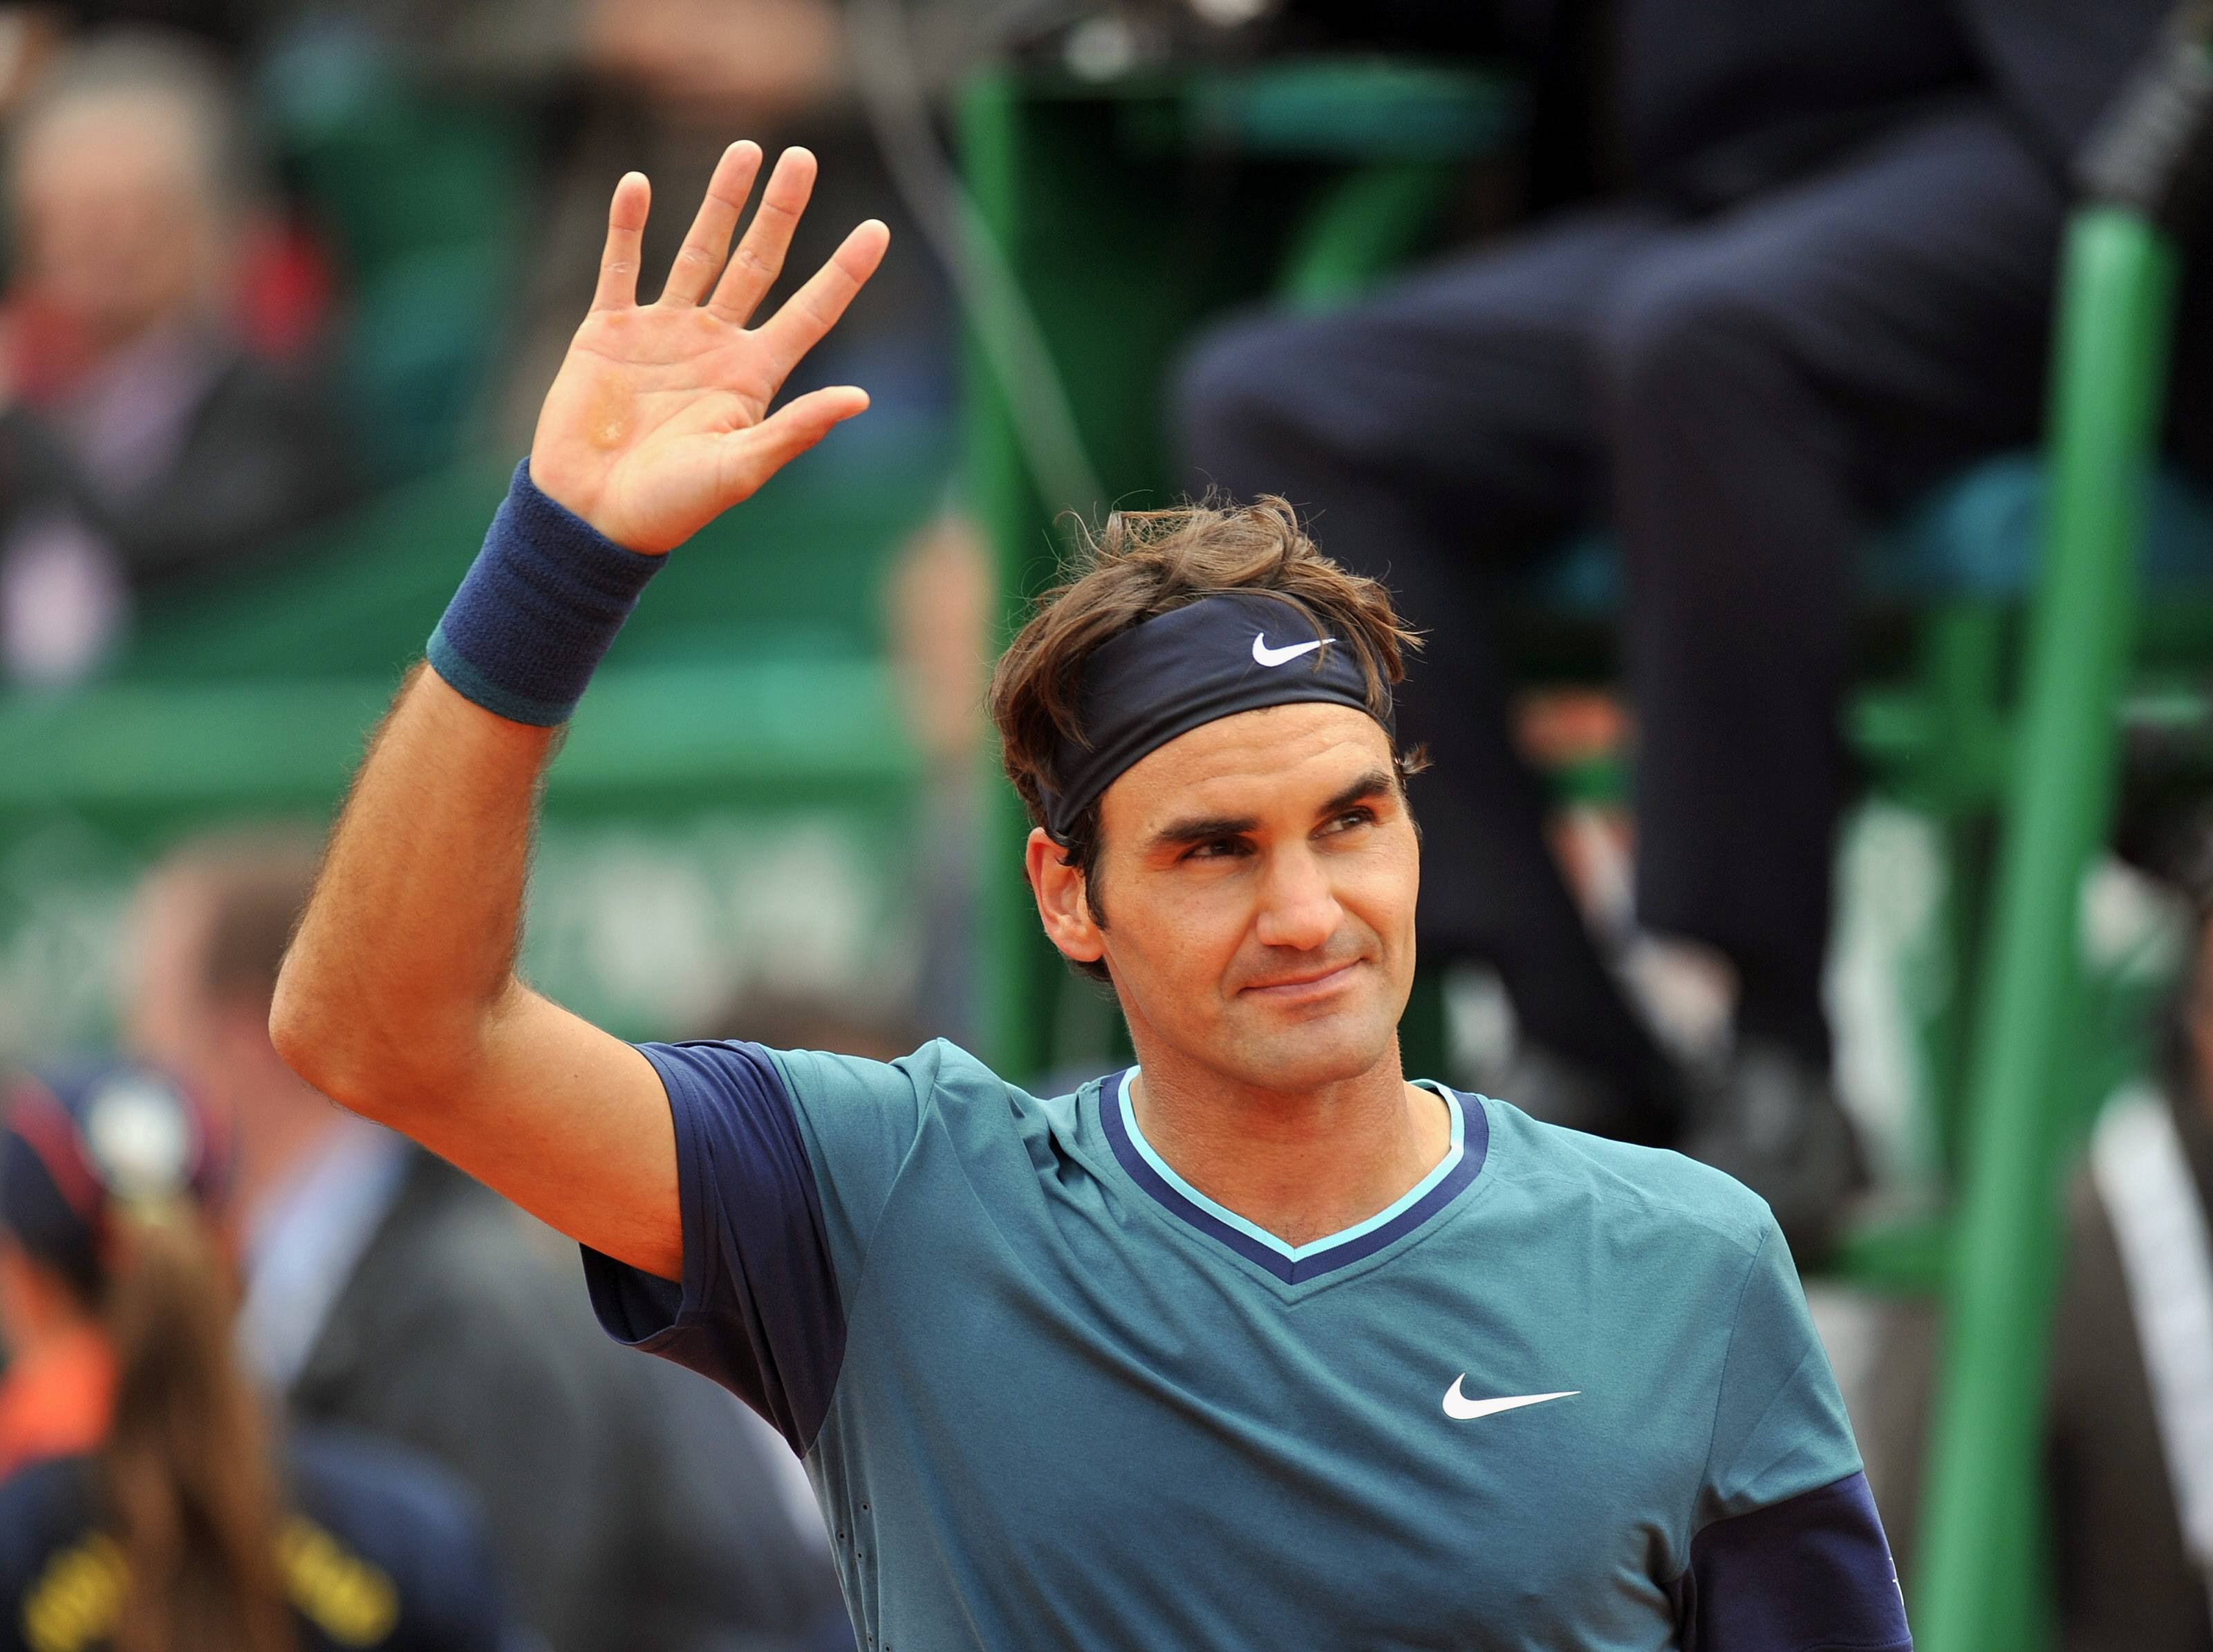 Roger Federer at the Monte Carlo Rolex Masters Tennis tournament, April 16, 2014.